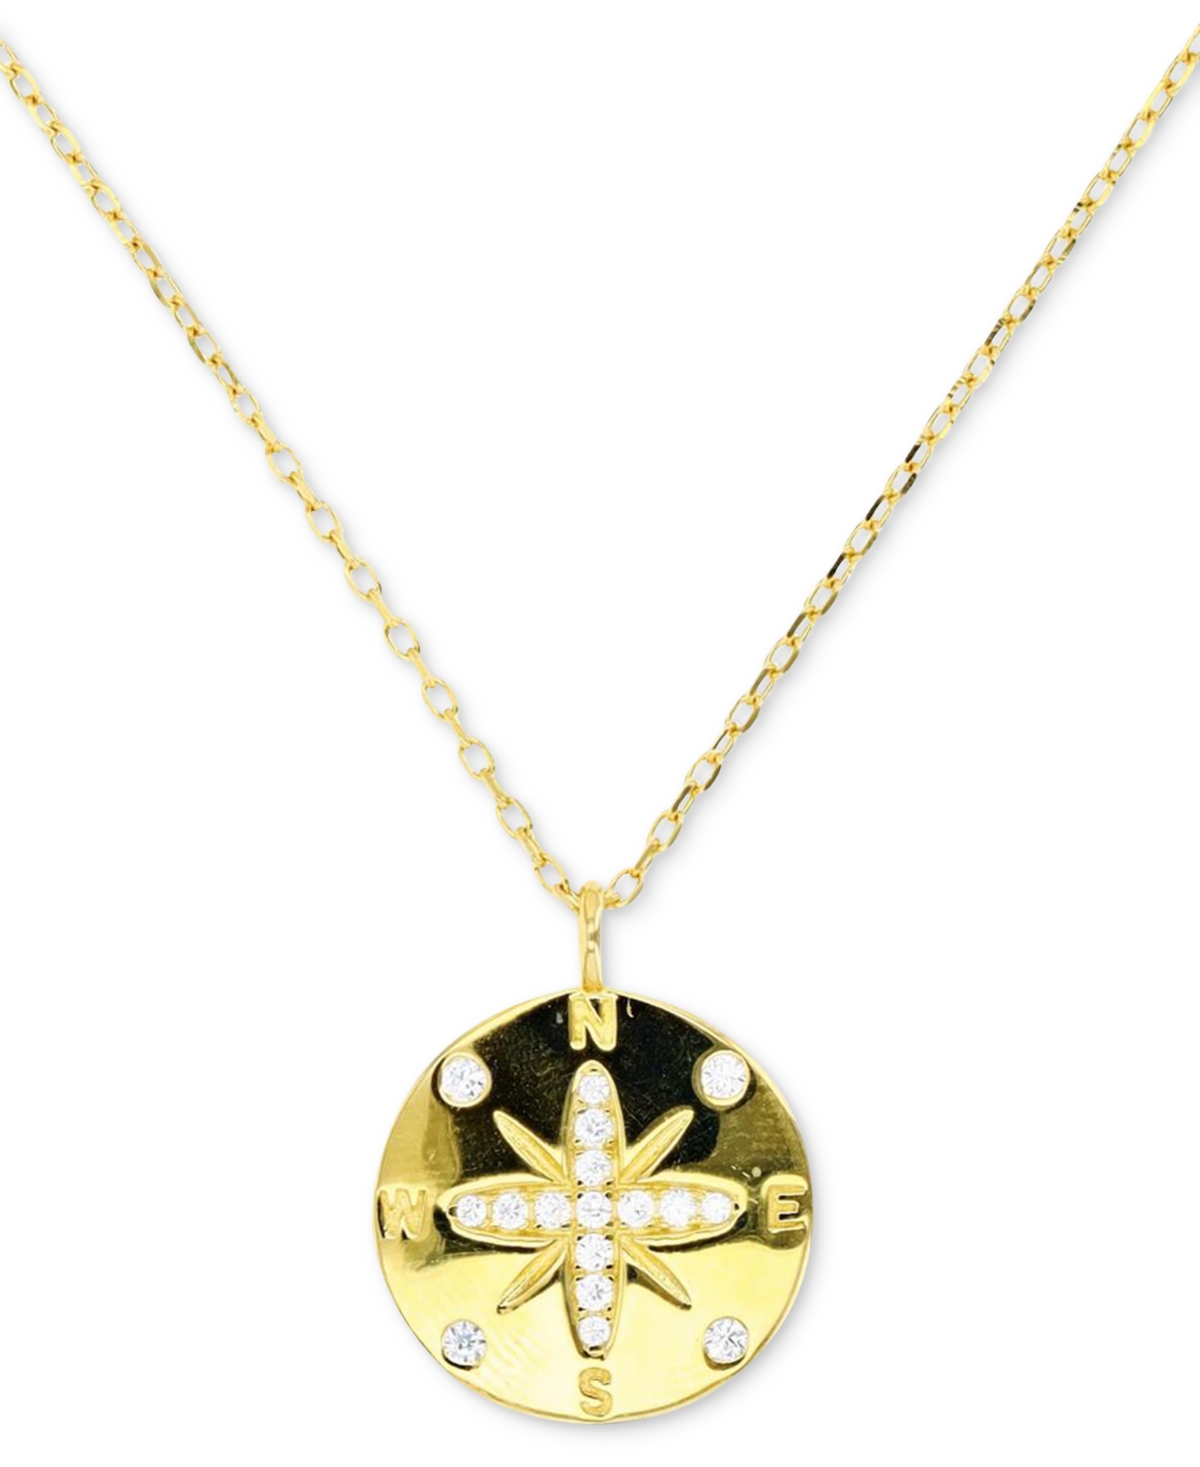 Macy's Cubic Zirconia Sand Dollar Pendant Necklace In 14k Gold-plated Sterling Silver, 18" +2" Extender